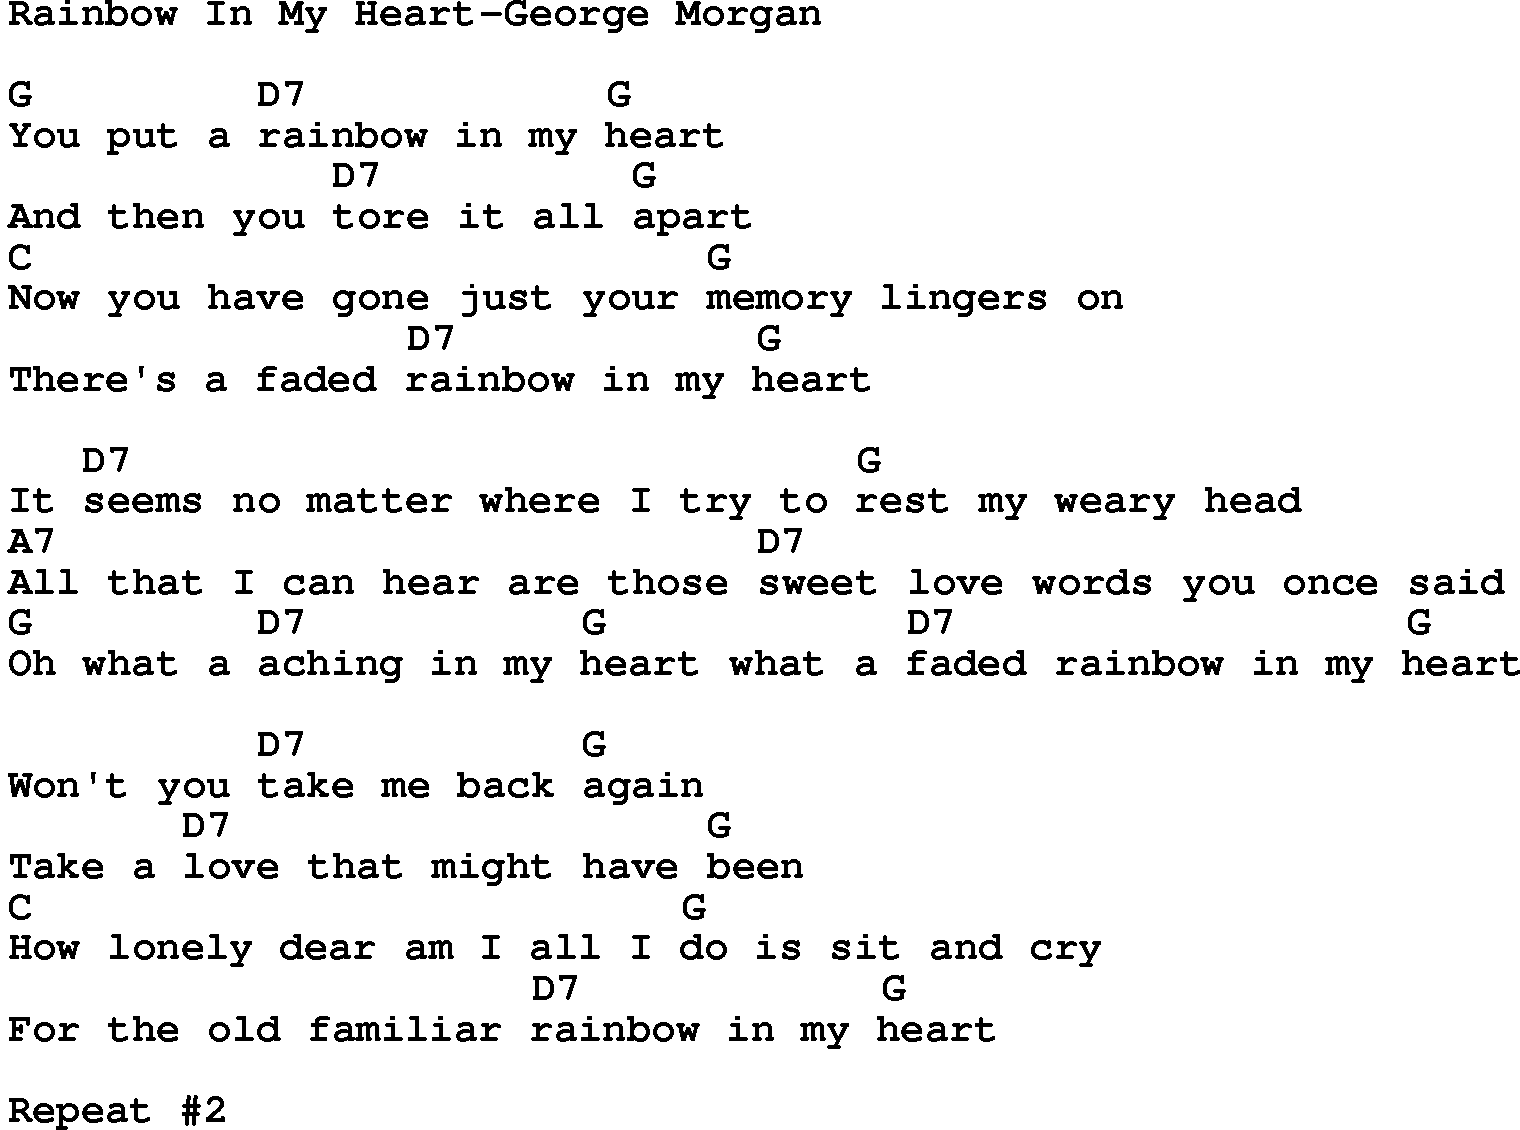 Country music song: Rainbow In My Heart-George Morgan lyrics and chords